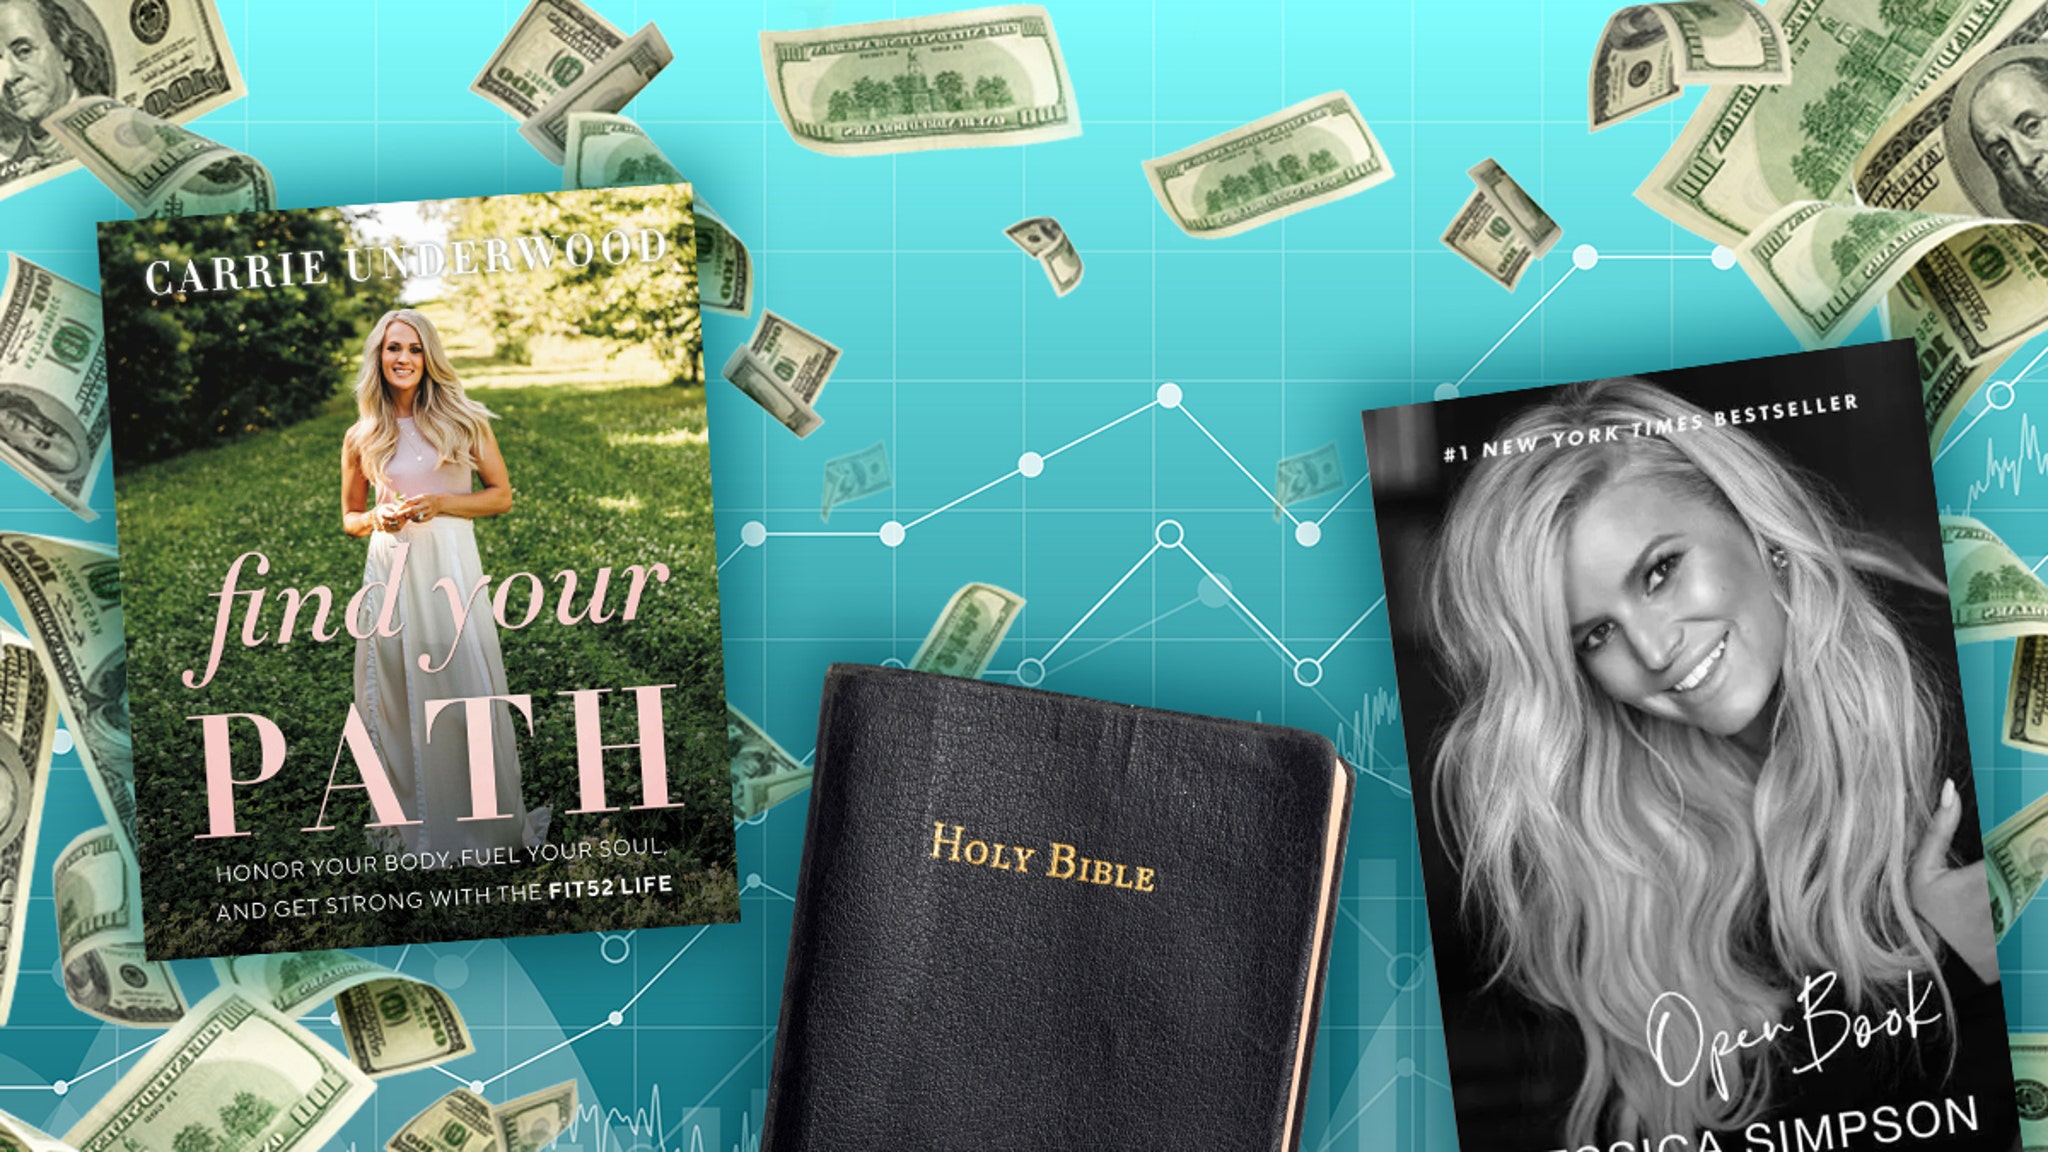 Carrie Underwood, Jessica Simpson Topping Book Sales During Pandemic